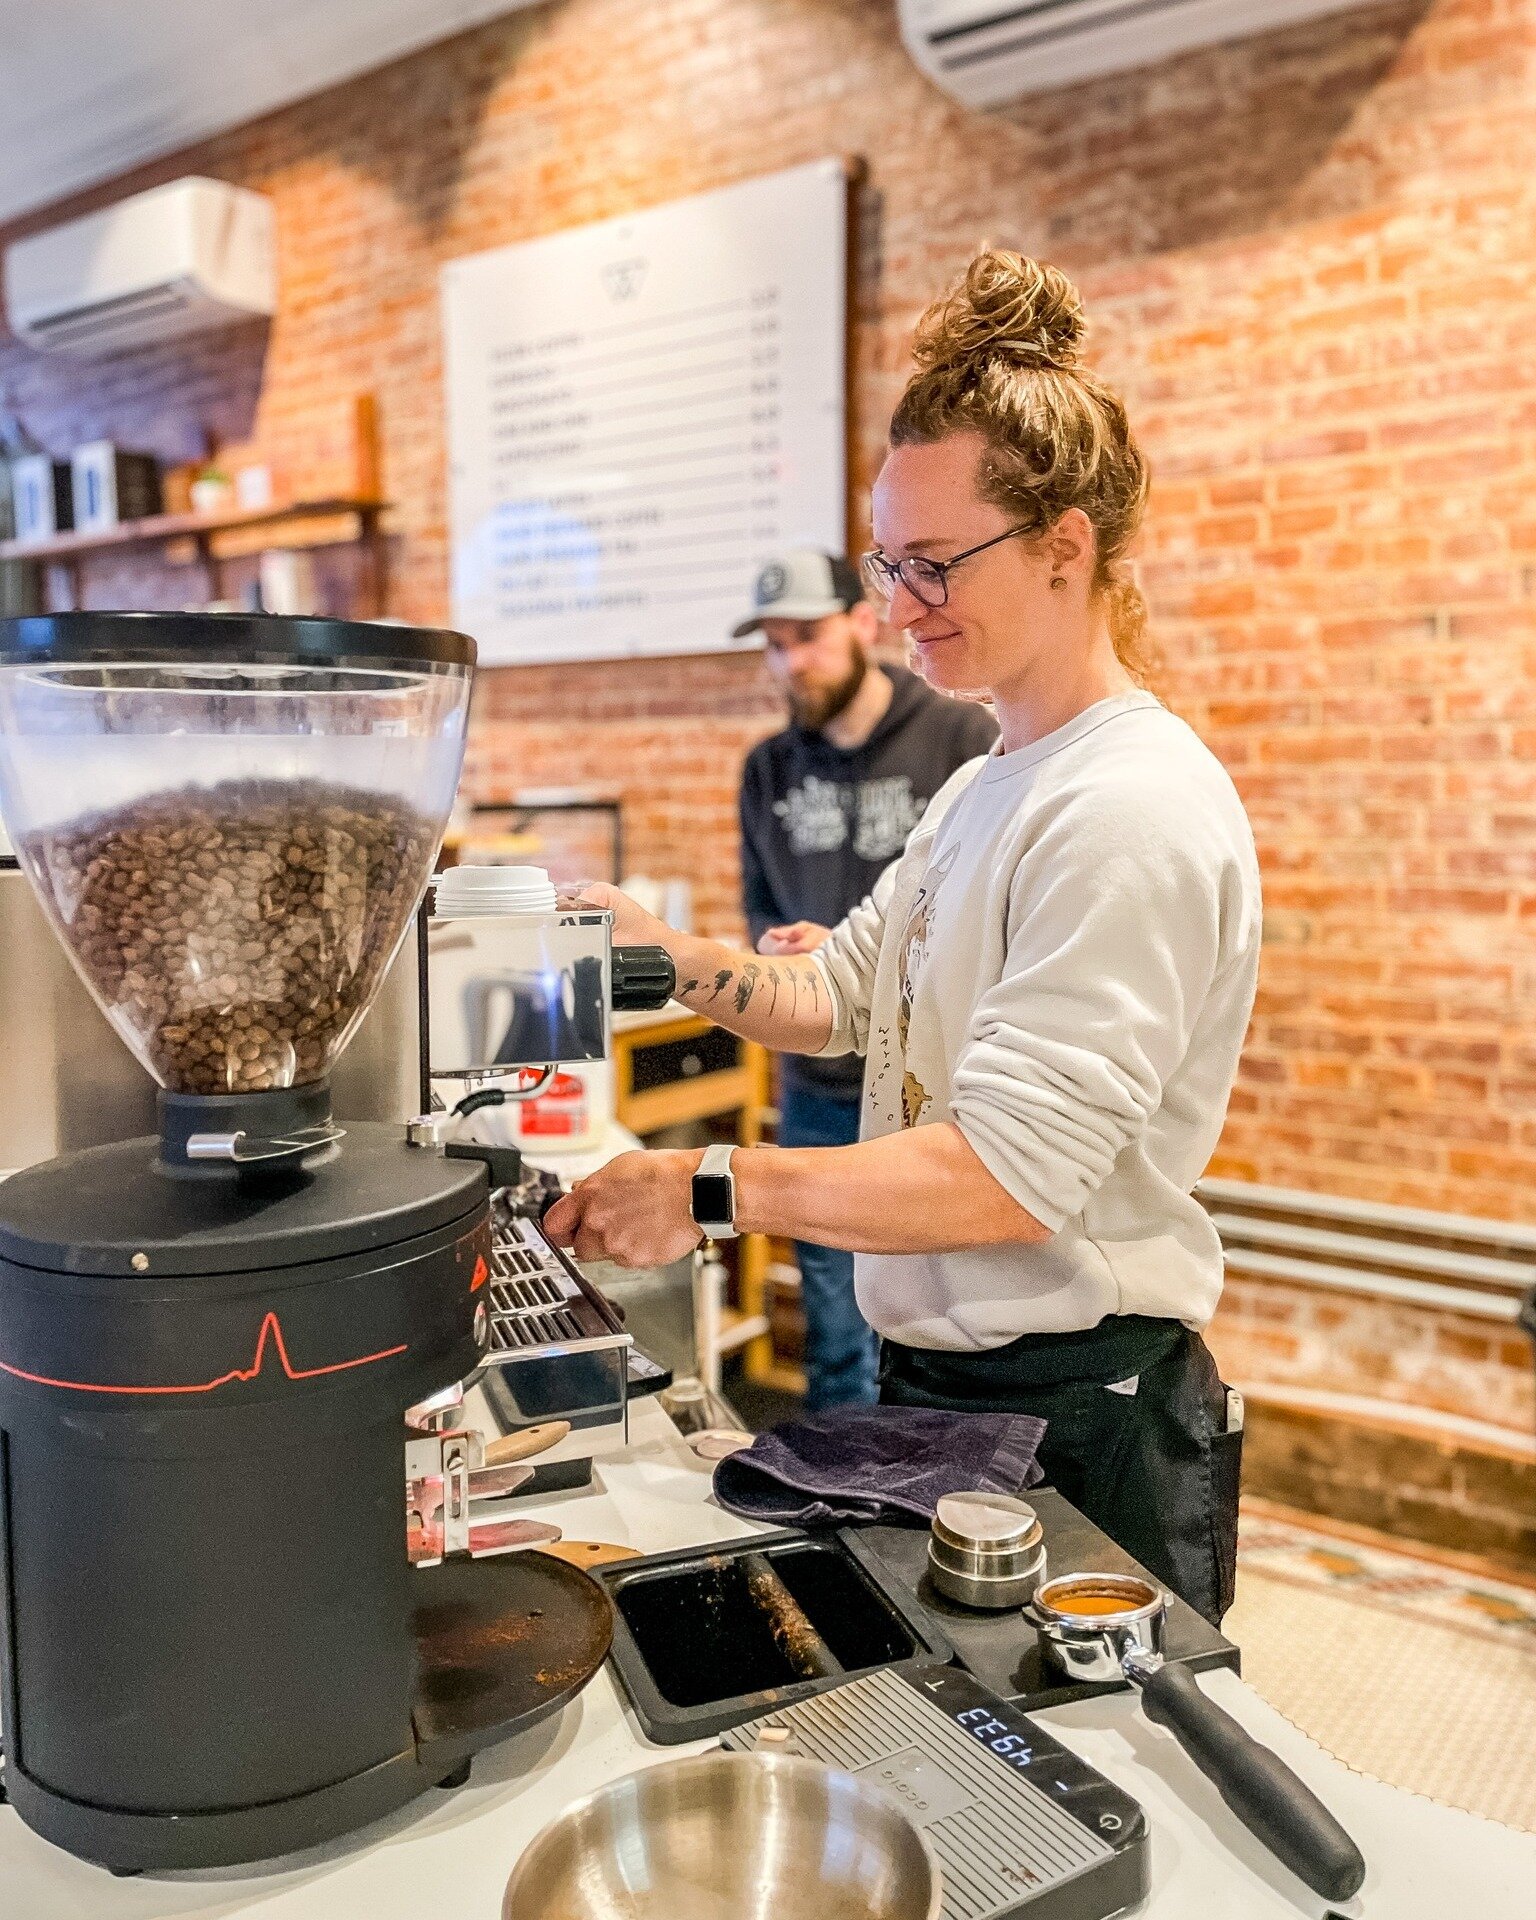 Behind every great cup of coffee, there's a skilled barista hard at work ☕️
#waypointcoffeeco